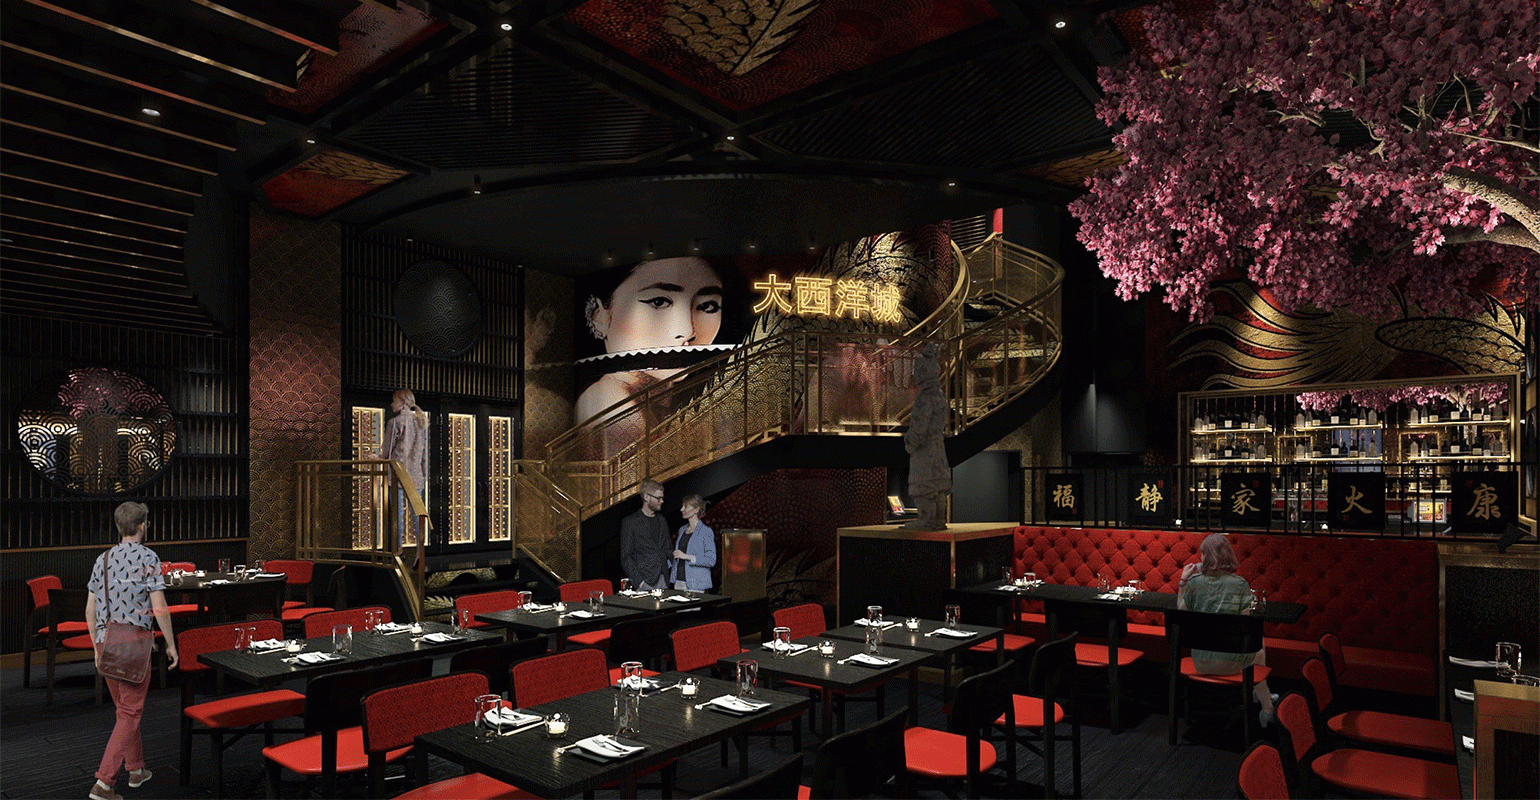 Pf Chang's Dining Room Open